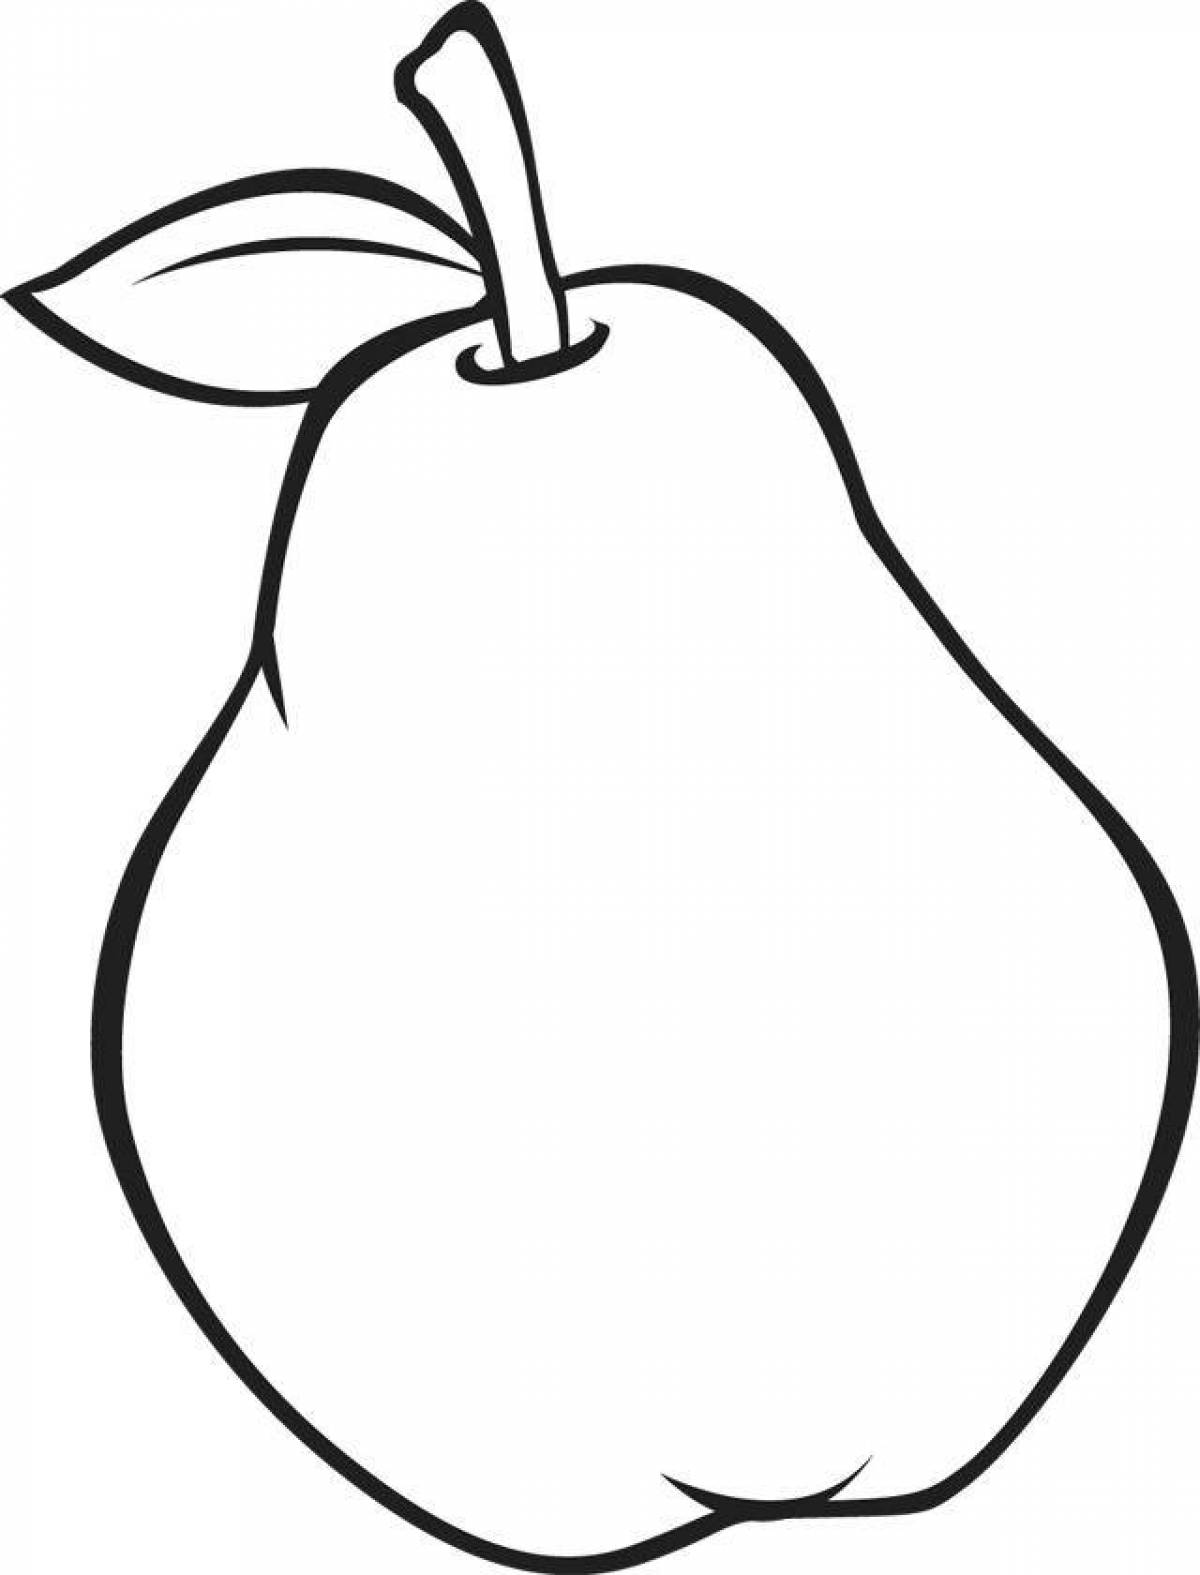 Awesome apple and pear coloring pages